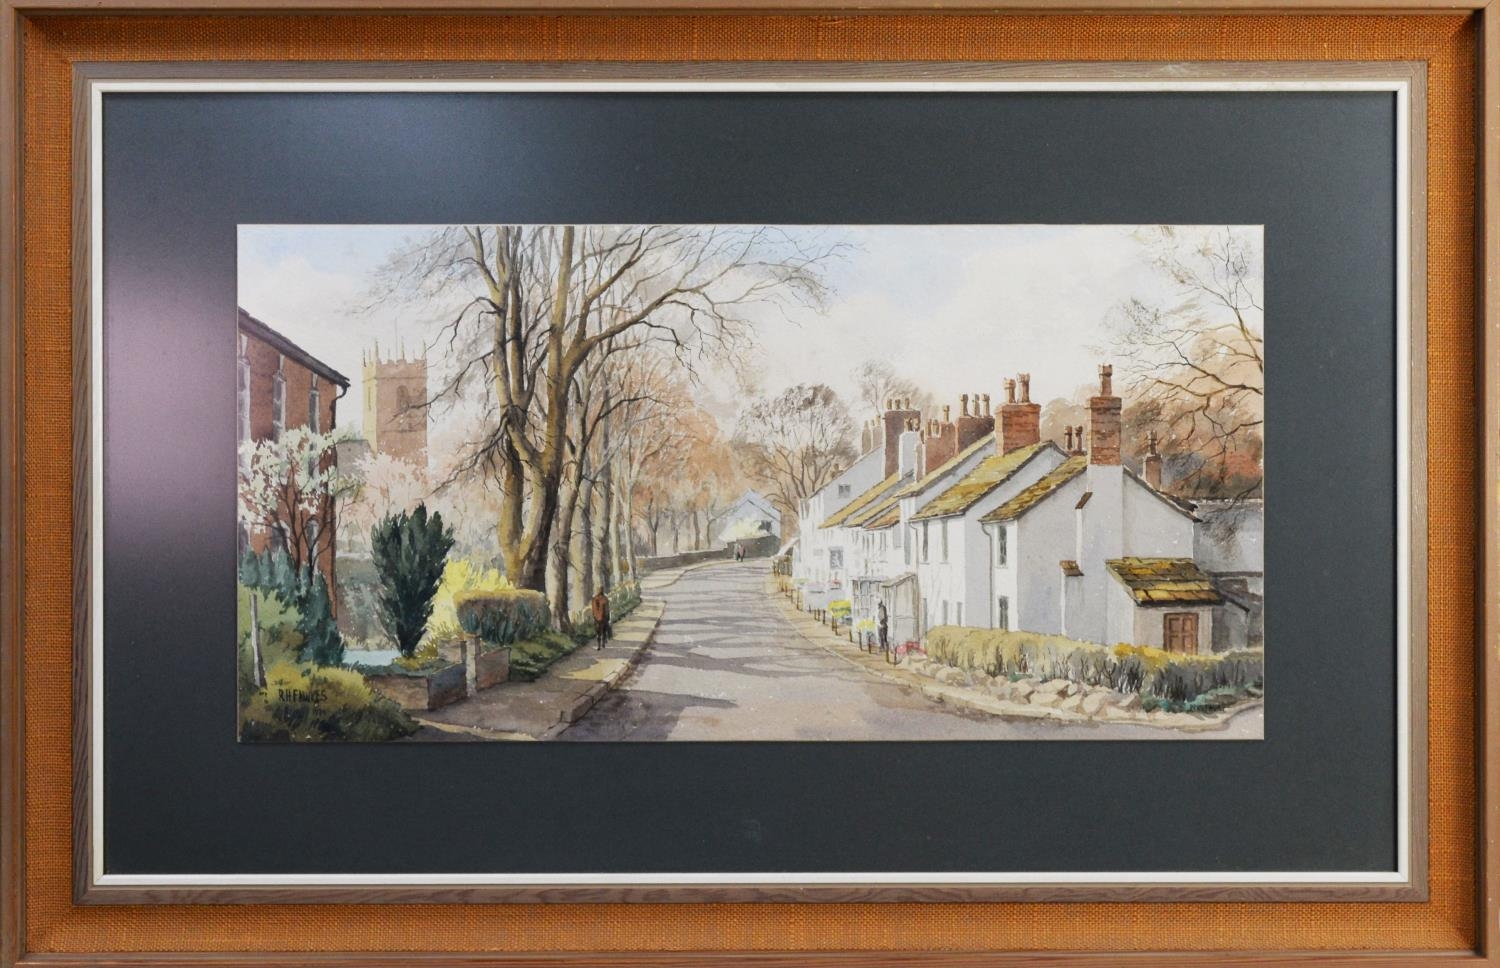 R H FAWKES (TWENTIETH CENTURY) WATERCOLOUR ‘Prestbury’ Signed, titled and dated 1979 15 ¼” x - Image 2 of 2